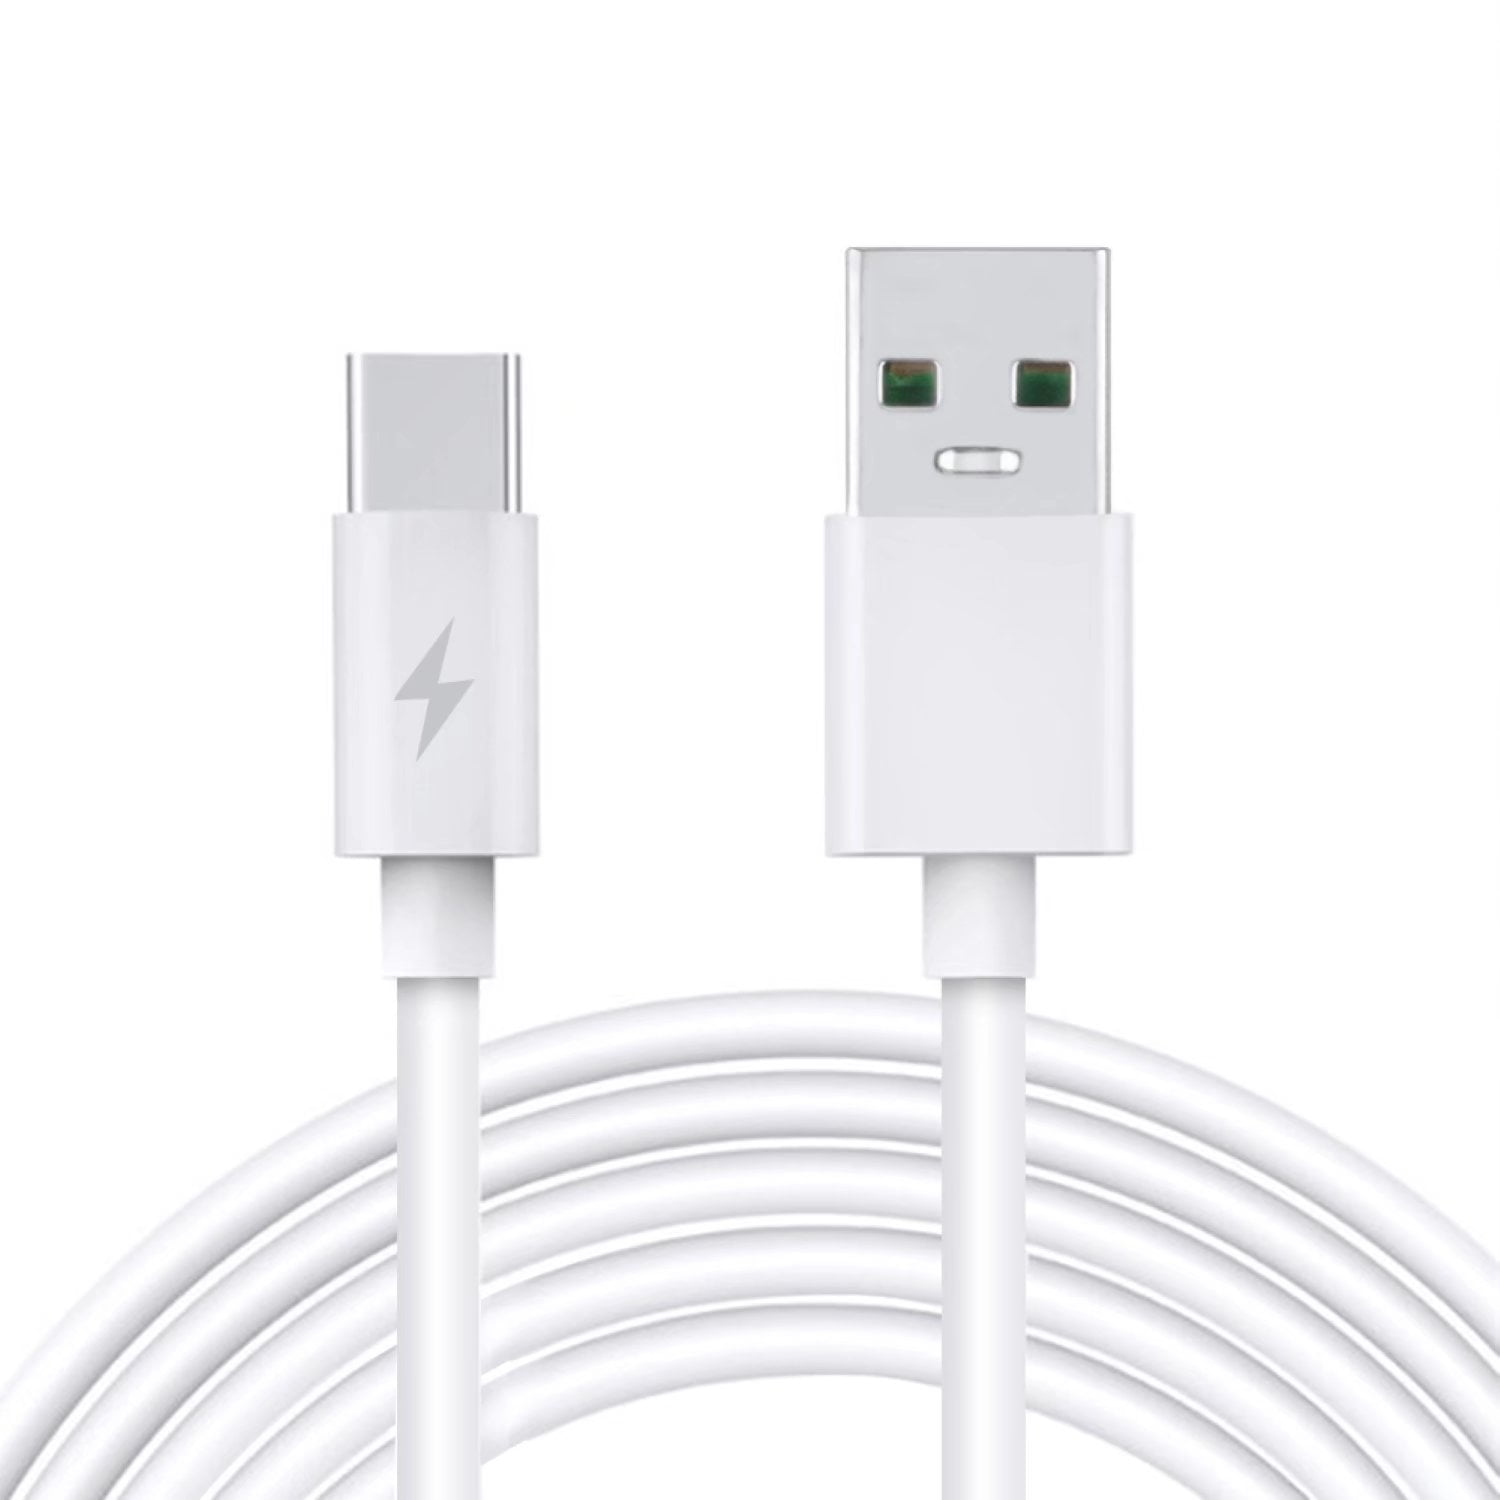 PREMIUM COILED USB CABLE POWER WIRE FAST CHARGE SYNC CORD for iPHONE iPAD iPOD 